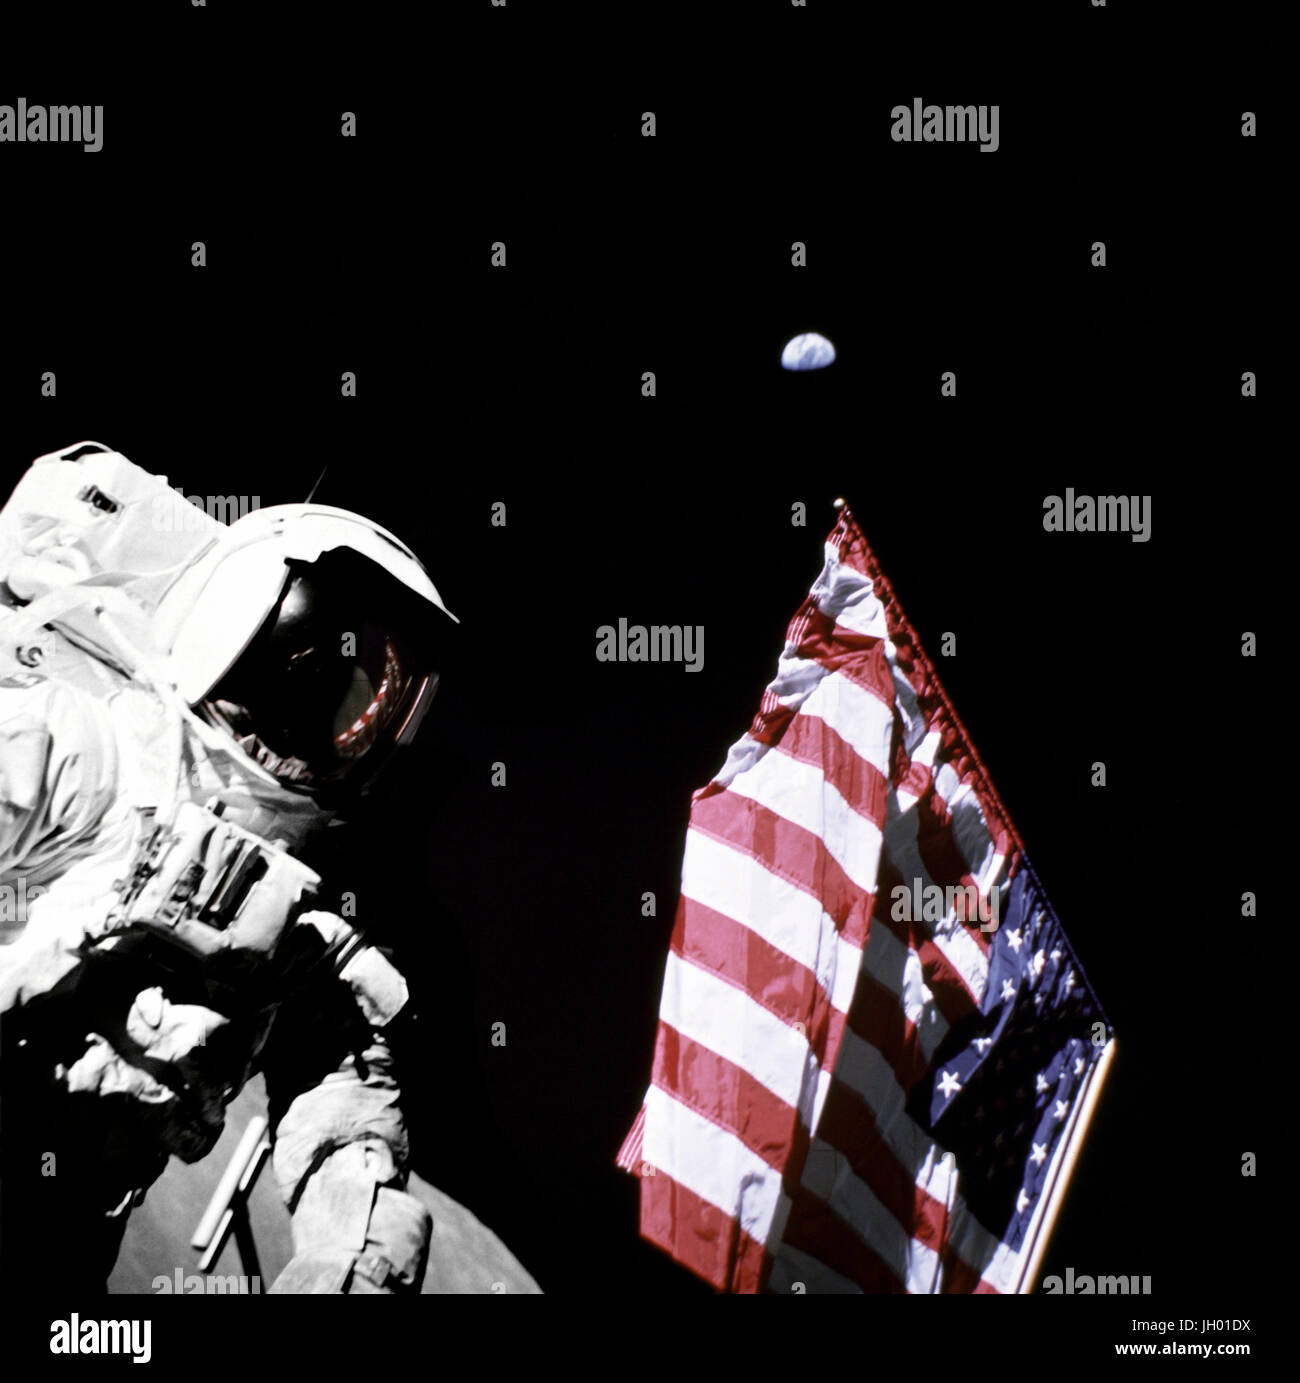 Schmitt with Flag and Earth Above. Geologist-Astronaut Harrison Schmitt, Apollo 17 Lunar Module pilot, is photographed next to the American Flag during extravehicular activity (EVA) of NASA's final lunar landing mission in the Apollo series. The photo was taken at the Taurus-Littrow landing site. The highest part of the flag appears to point toward our planet earth in the distant background..Photographer: NASA Eugene Cernan Stock Photo